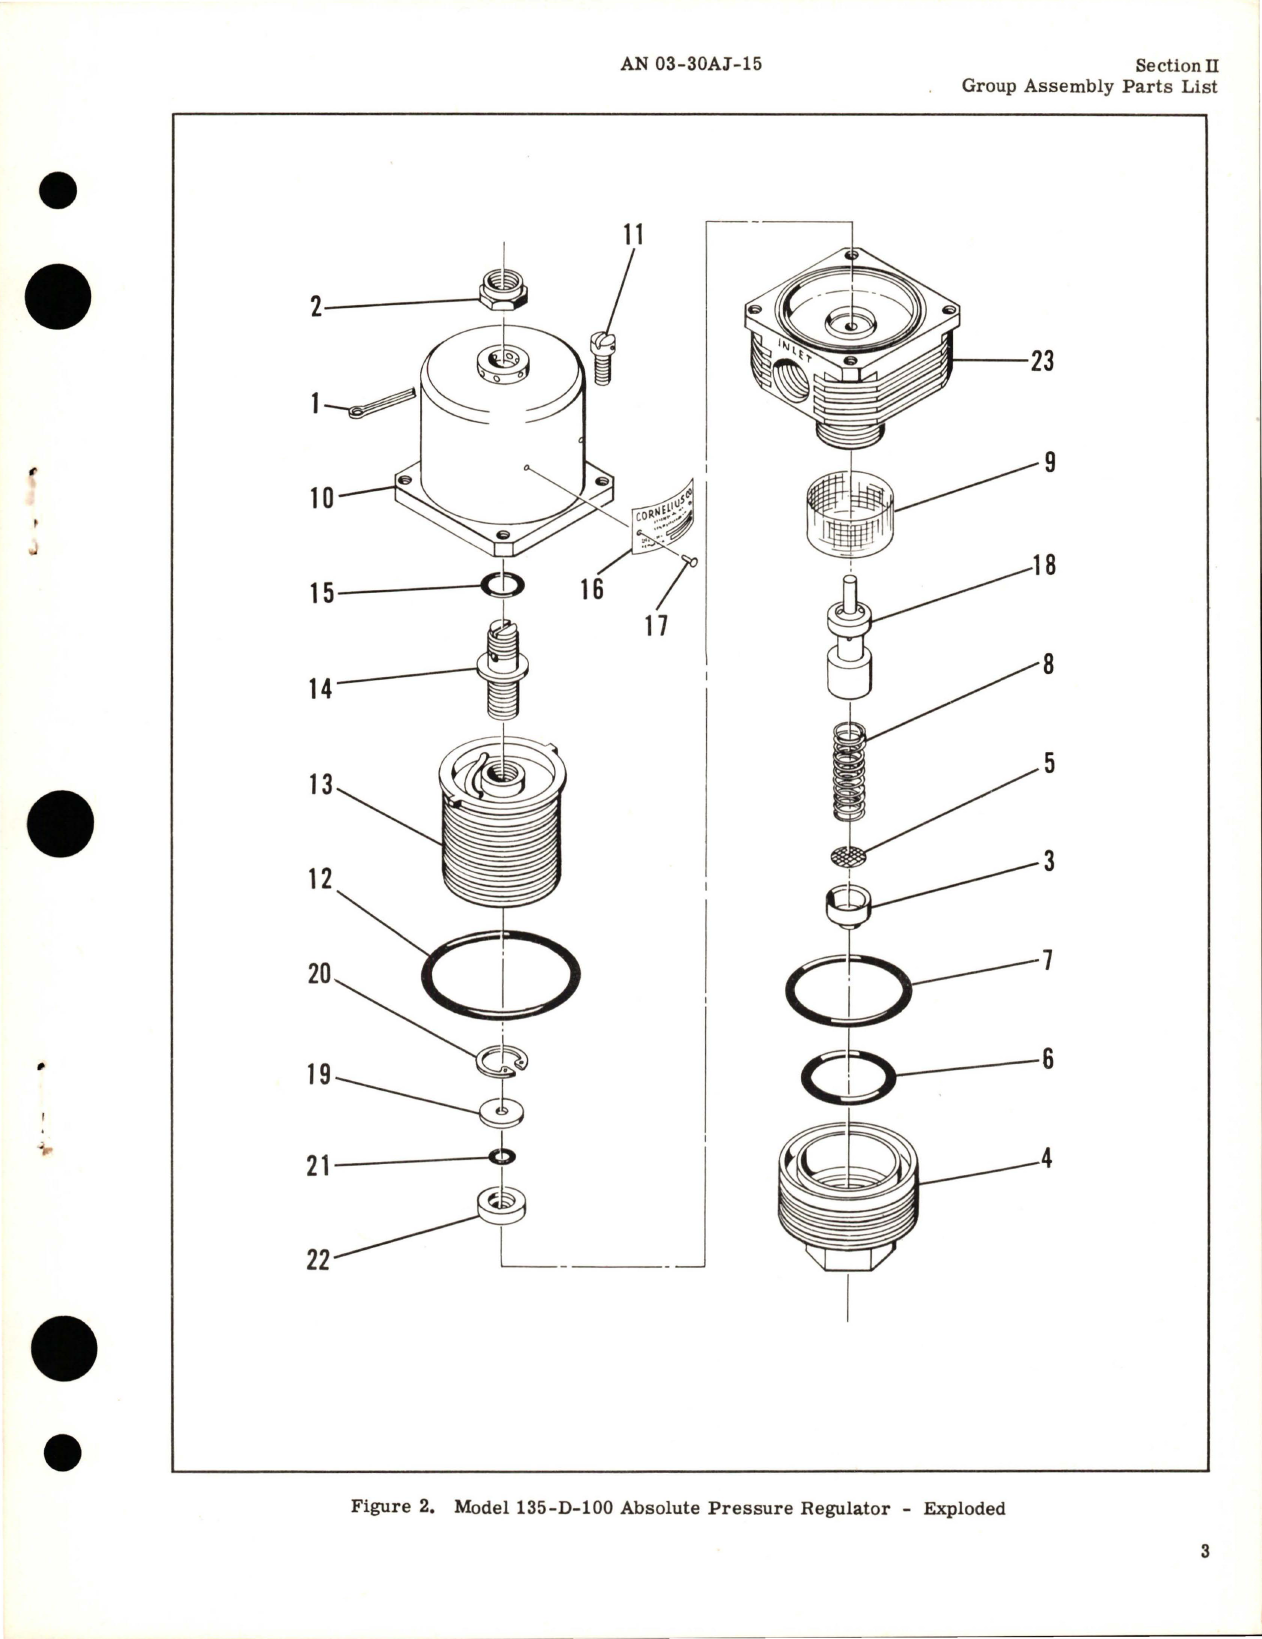 Sample page 5 from AirCorps Library document: Illustrated Parts Breakdown for Absolute Pressure Regulator - Models 135-D-100-1, 135-D-100-3, 135-D-100-4, and 135-D-100-5 